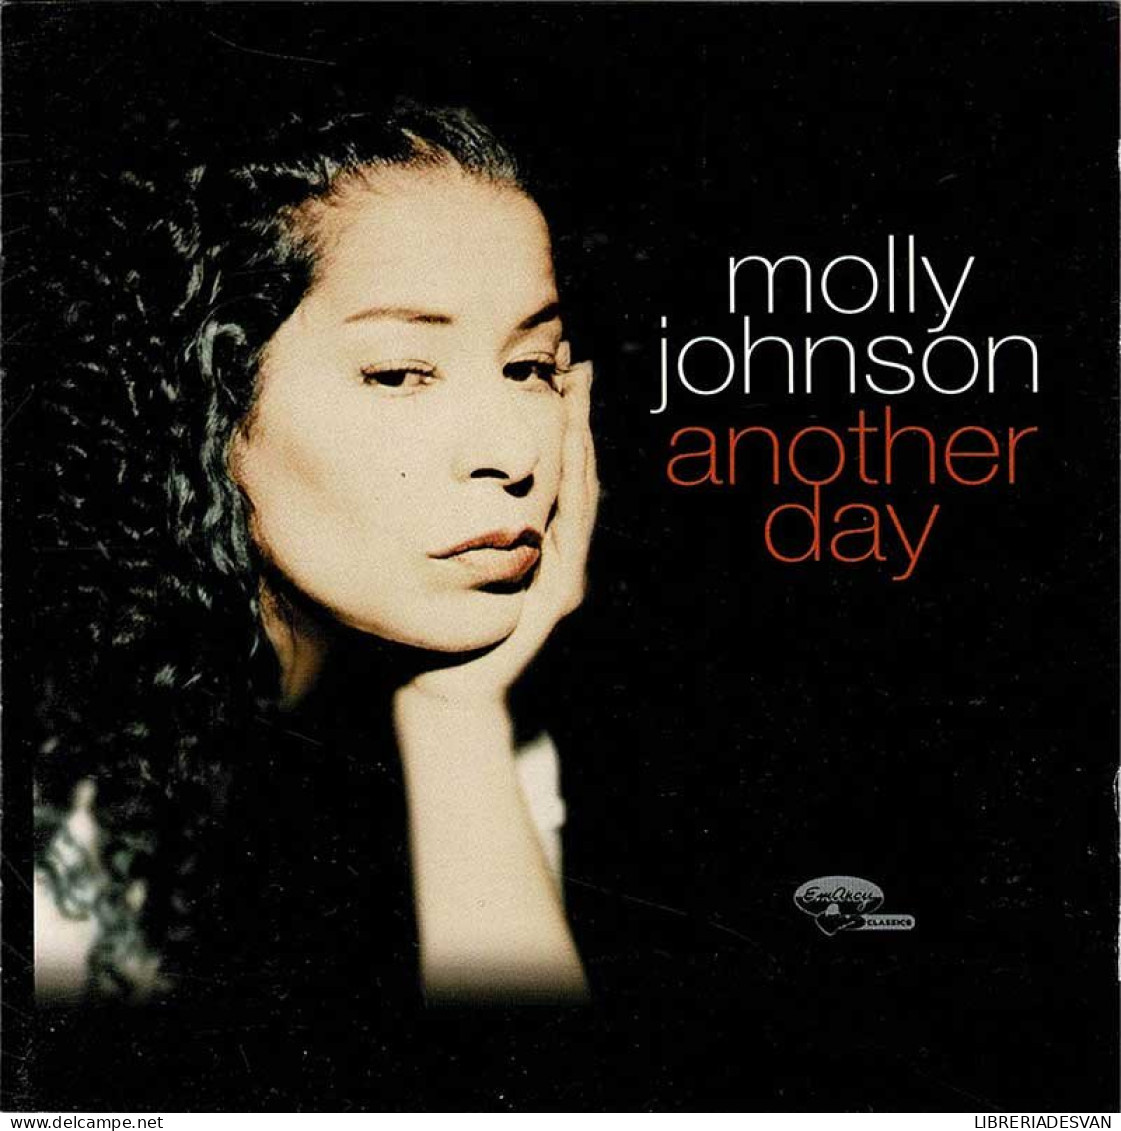 Molly Johnson - Another Day. CD - Jazz